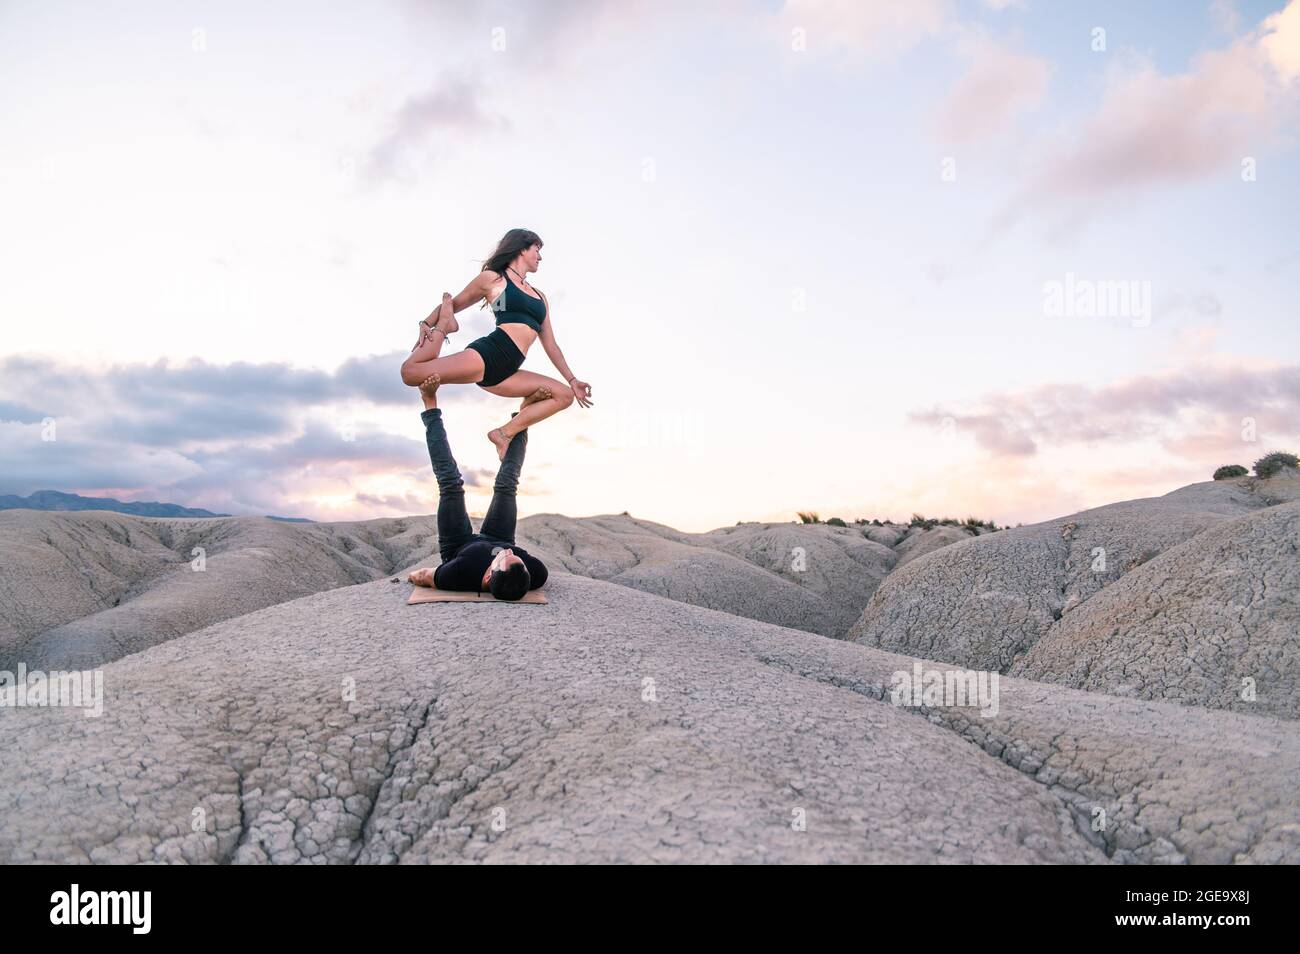 Serene Woman balancing in King Pigeon pose on legs of man while practicing acroyoga in highlands Stock Photo